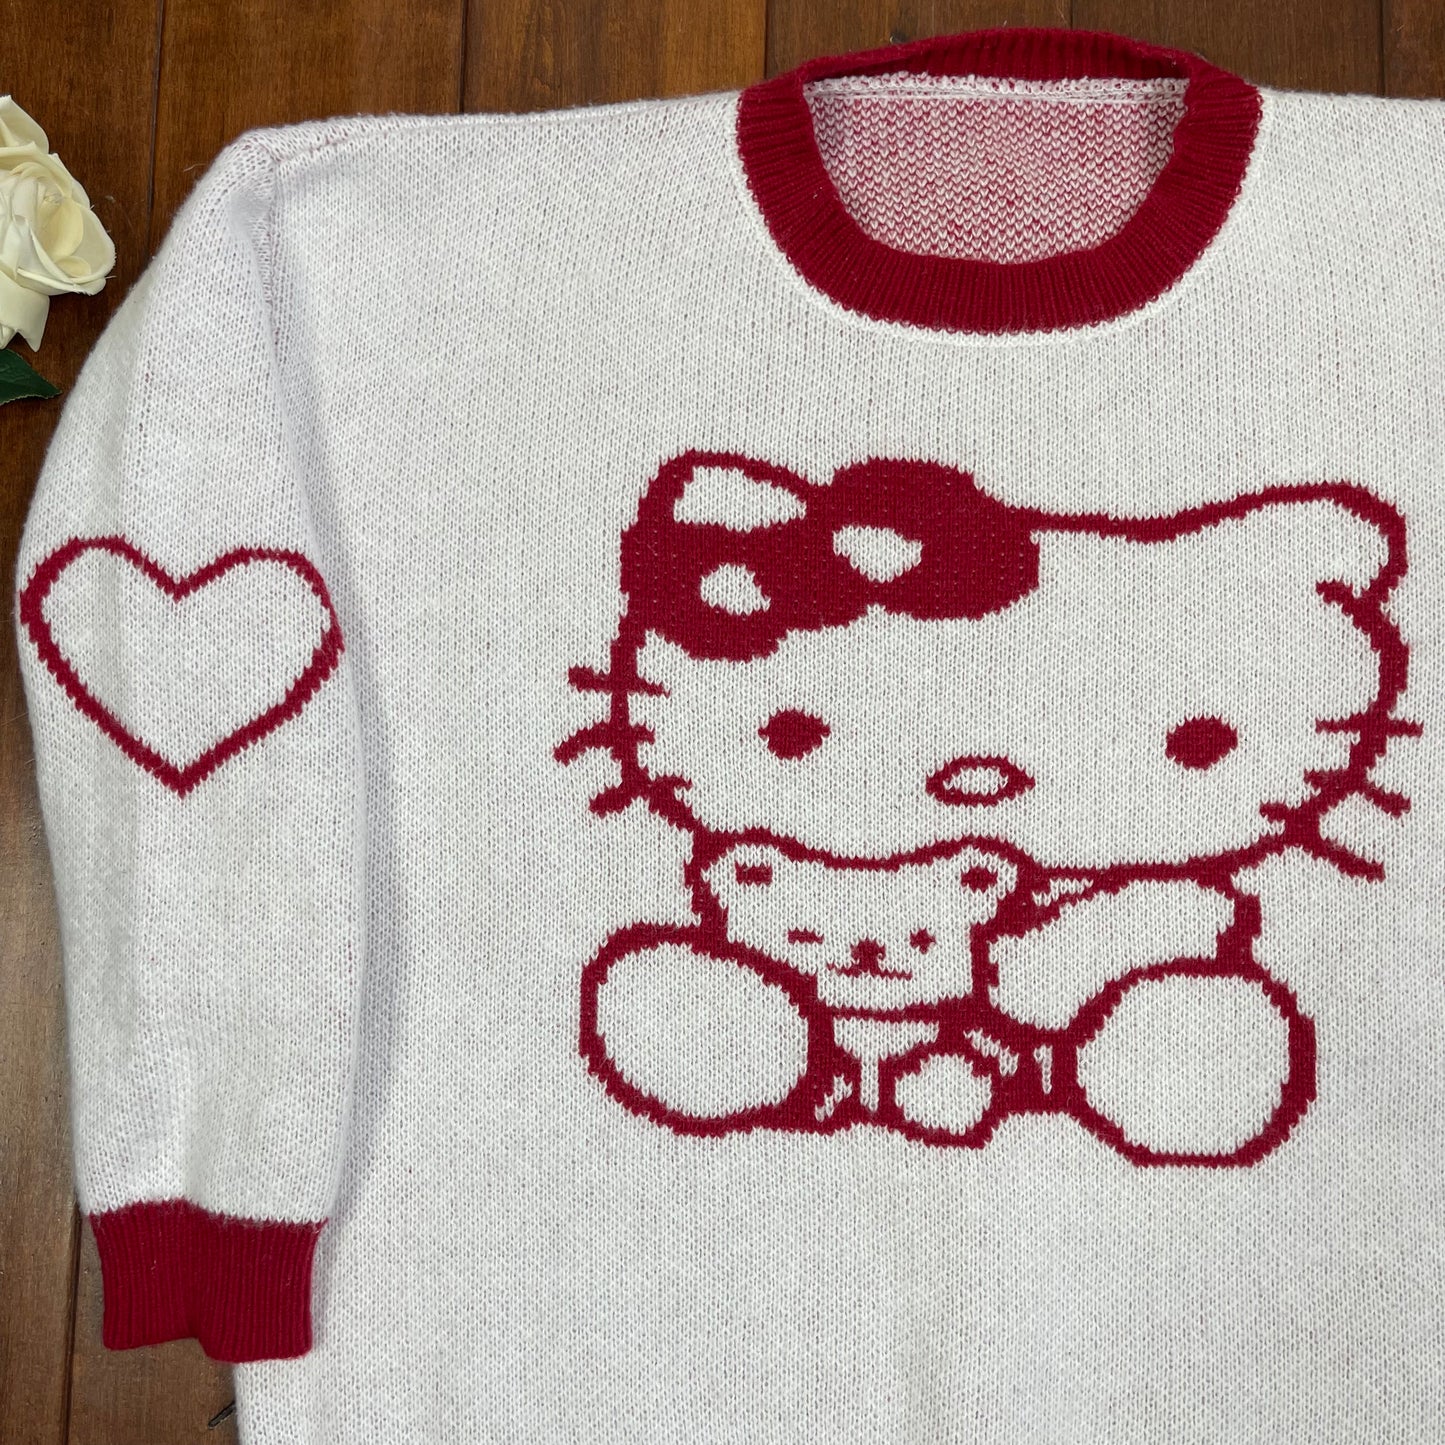 THRIFTED HELLO KITTY SWEATER